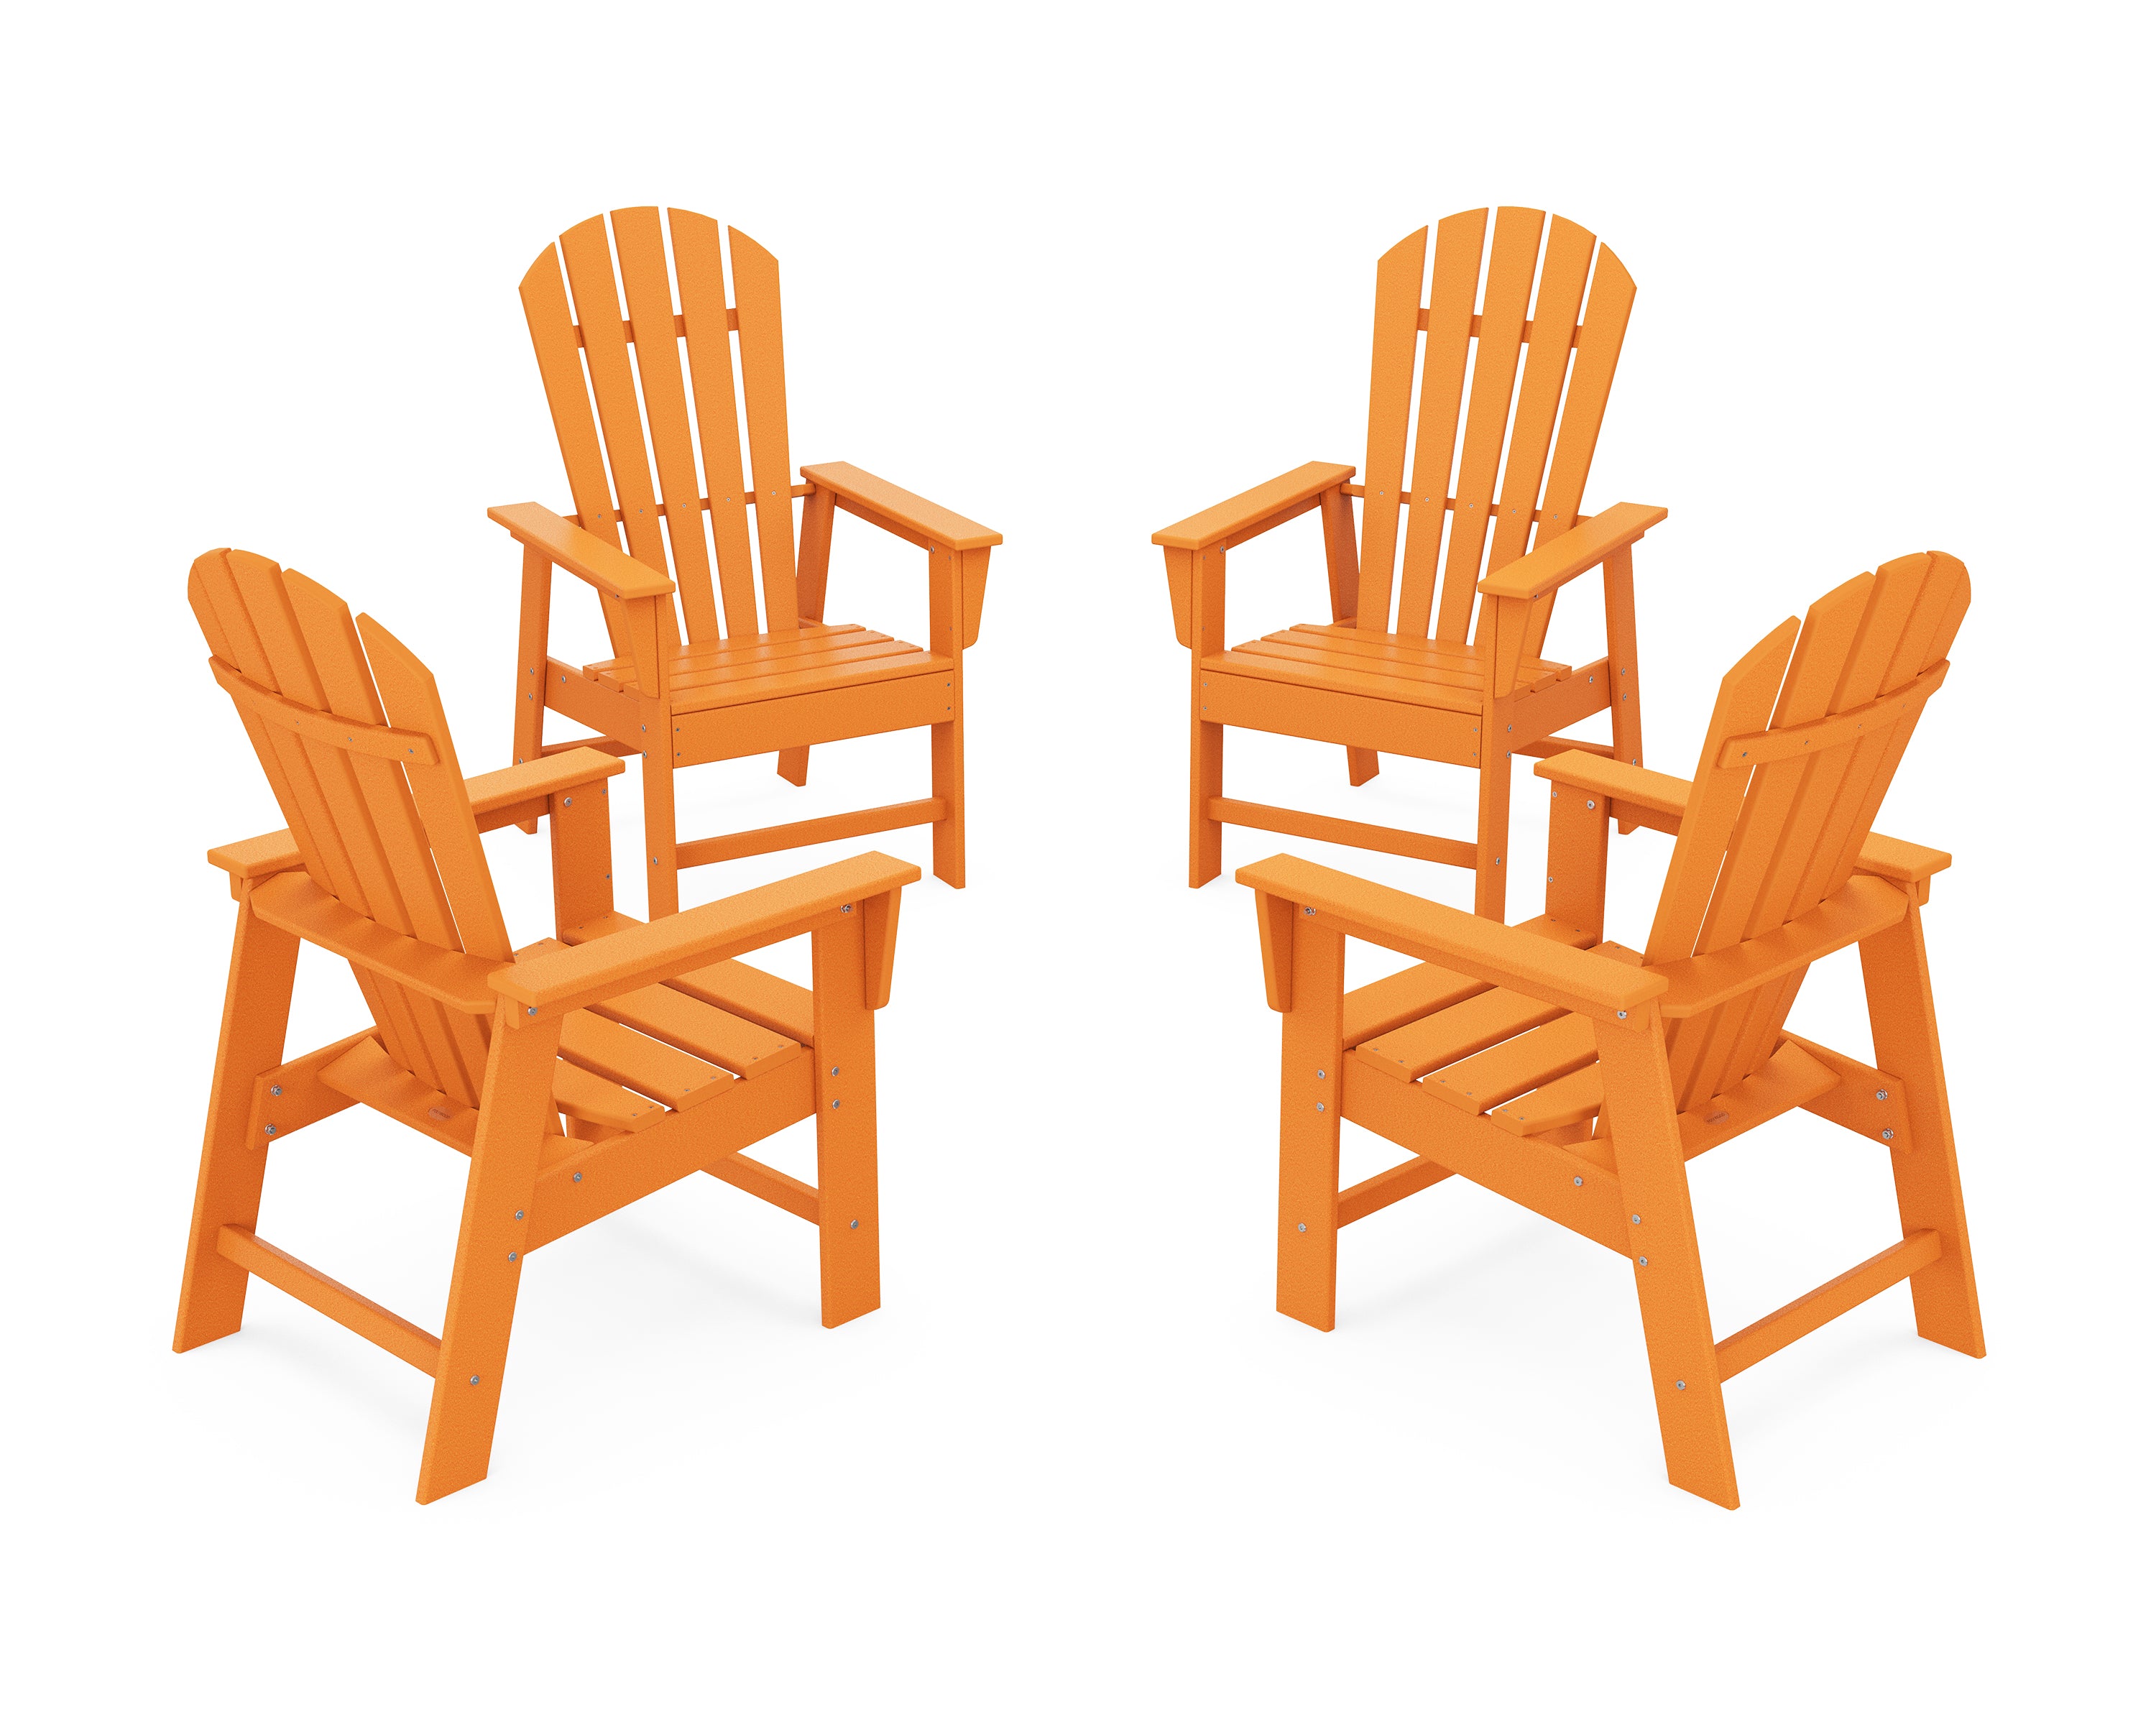 POLYWOOD® 4-Piece South Beach Casual Chair Conversation Set in Tangerine